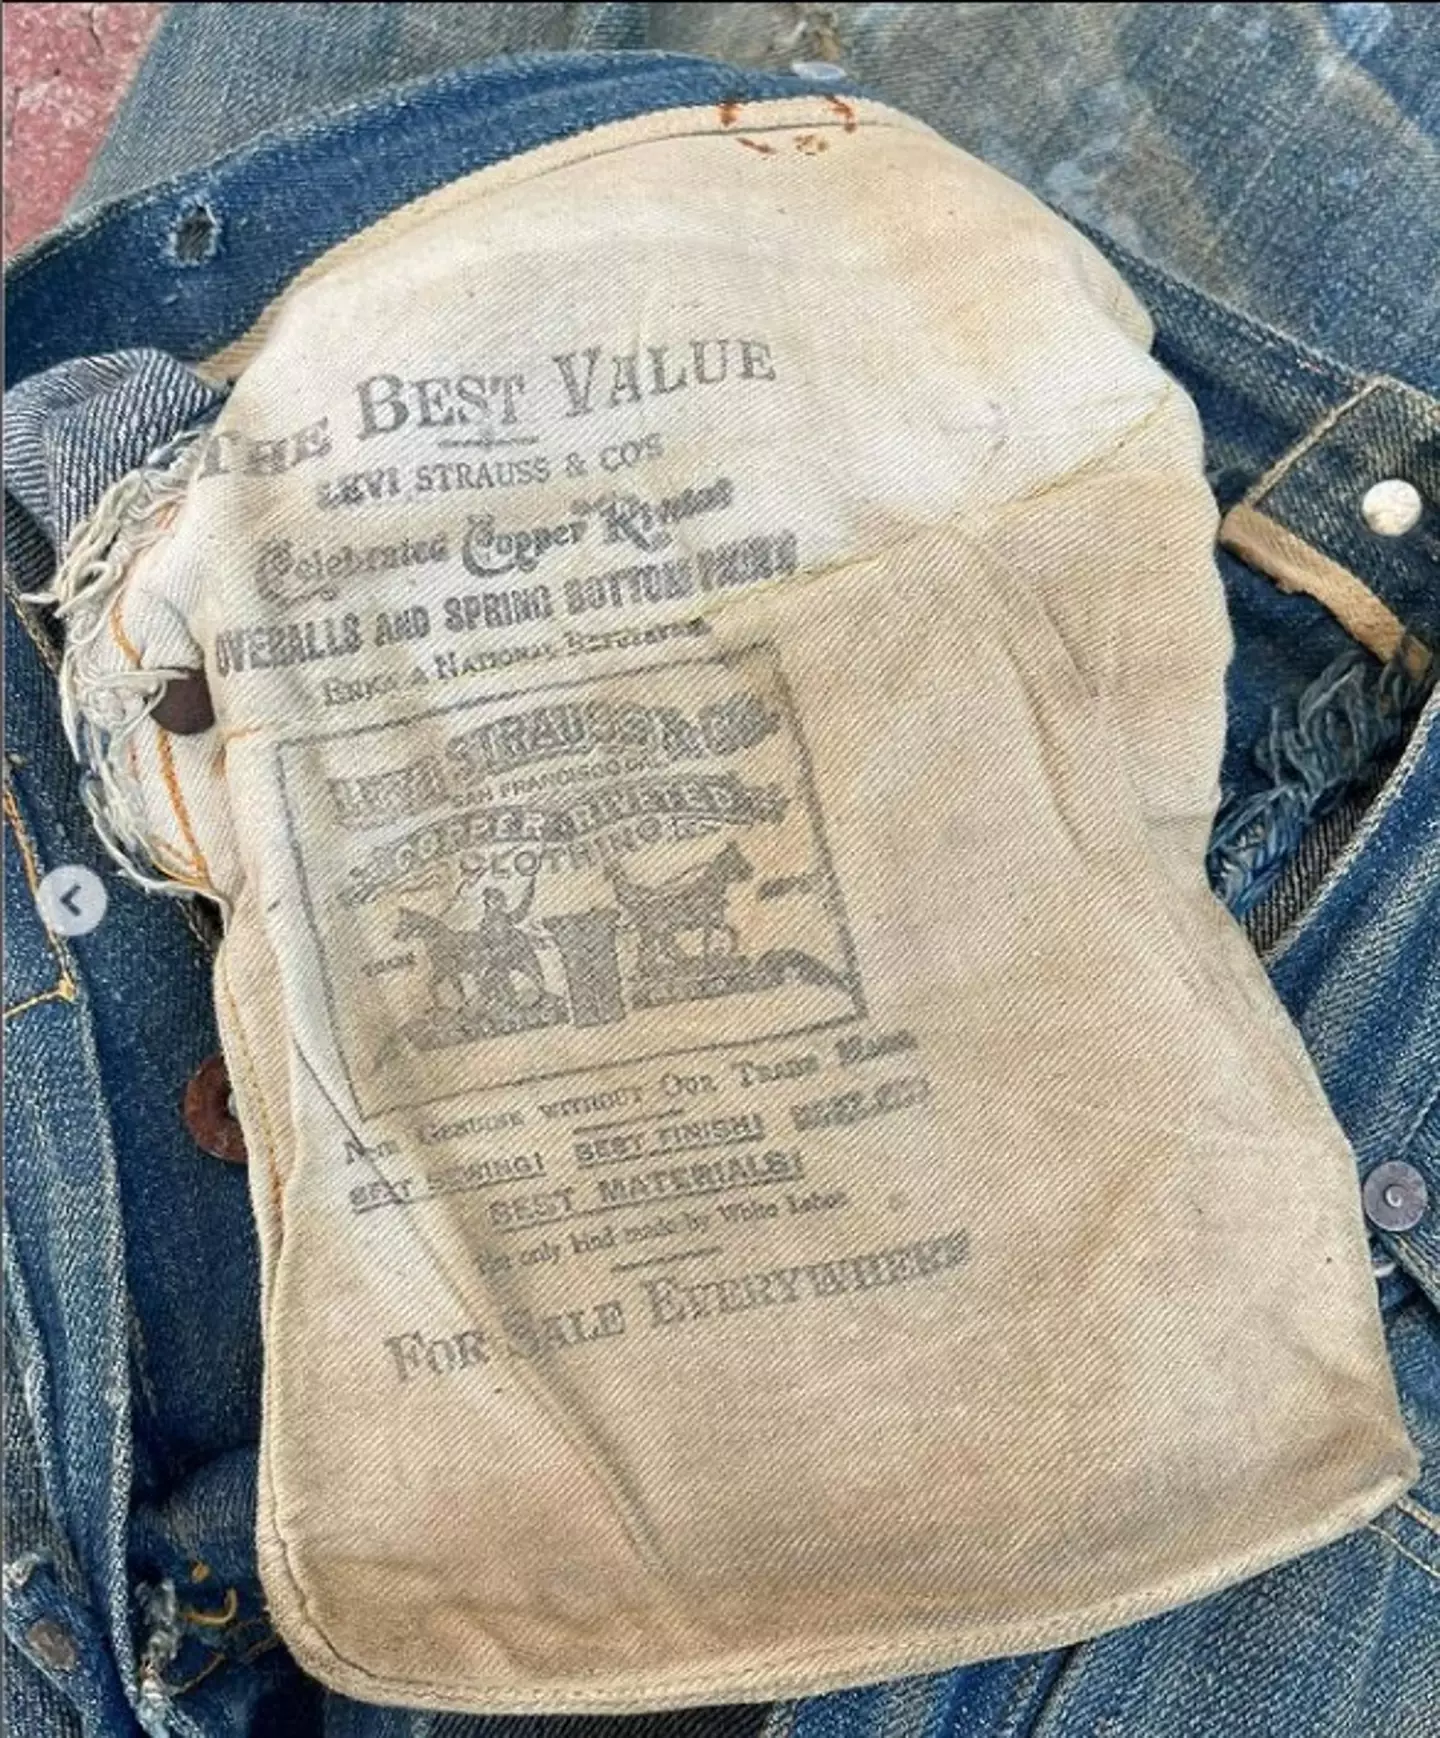 The jeans included the brand's original racist slogan.